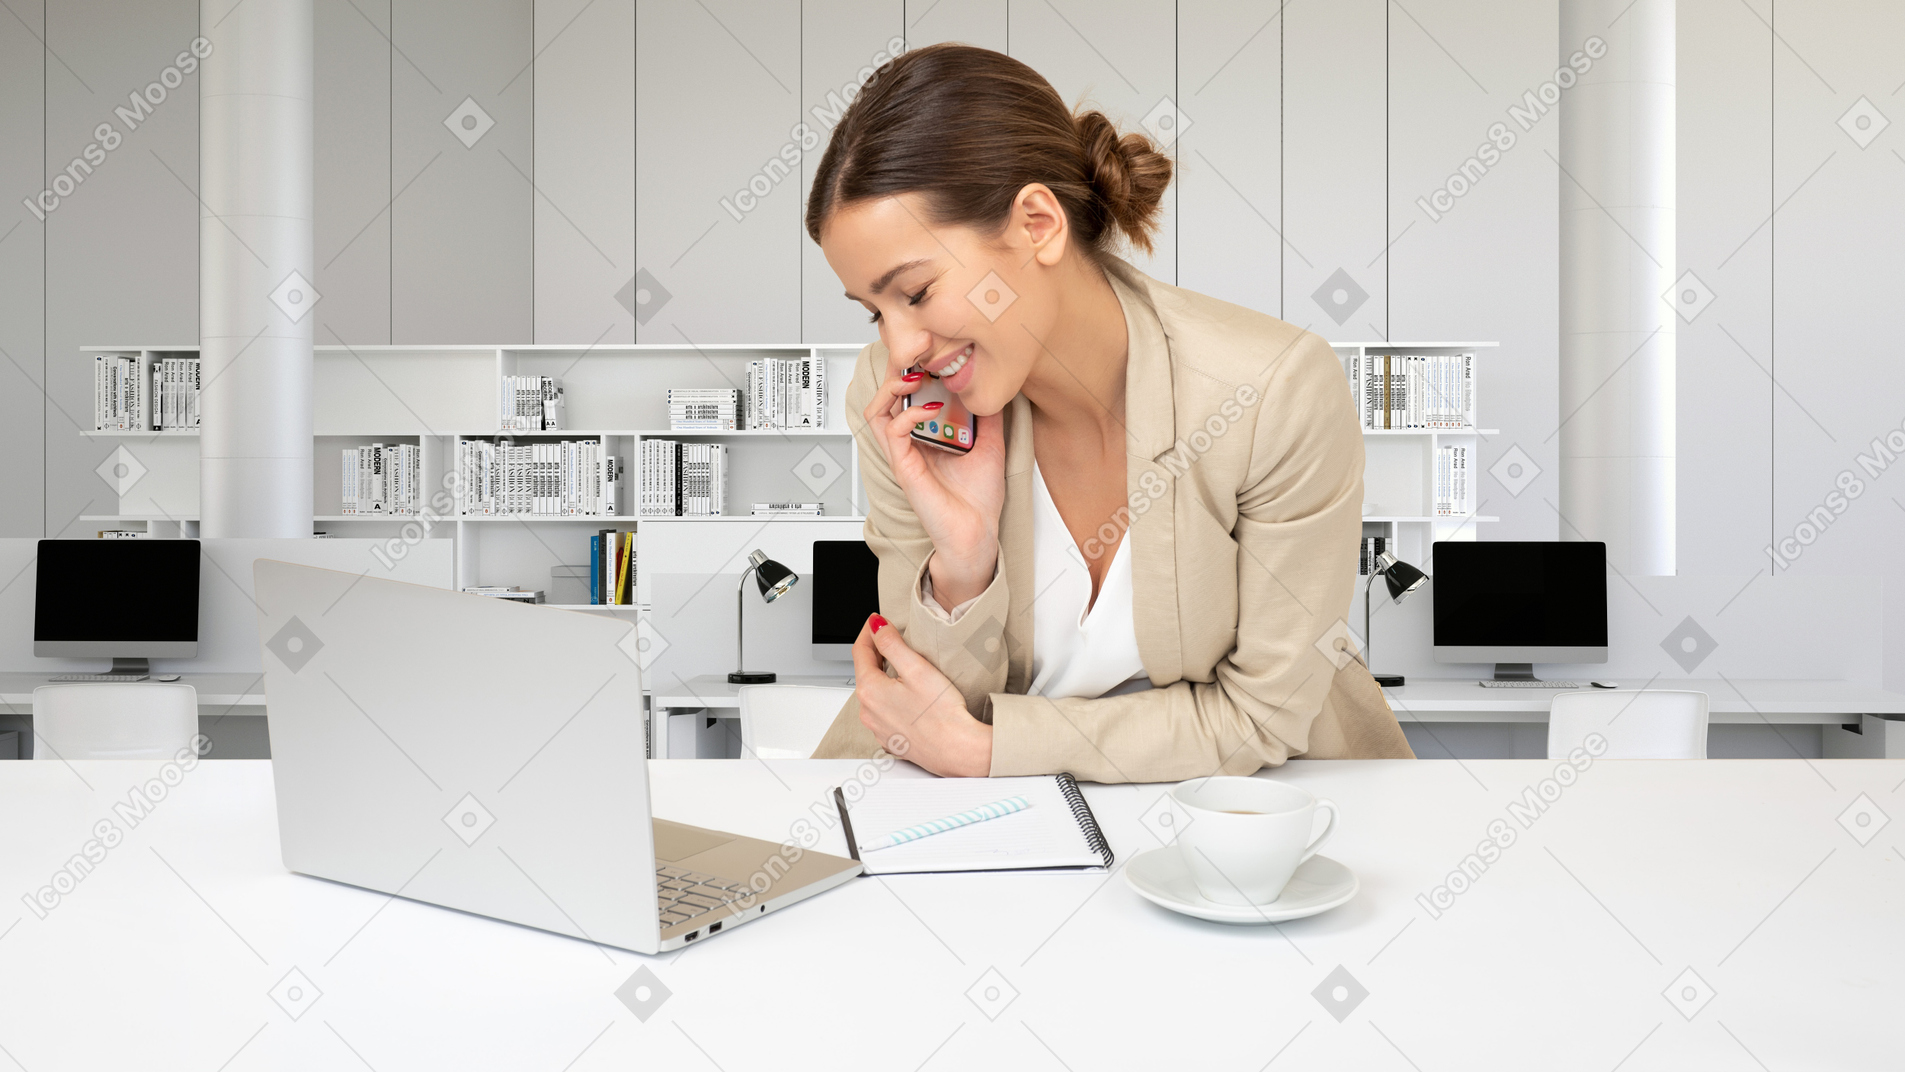 Woman sitting at a desk in an office